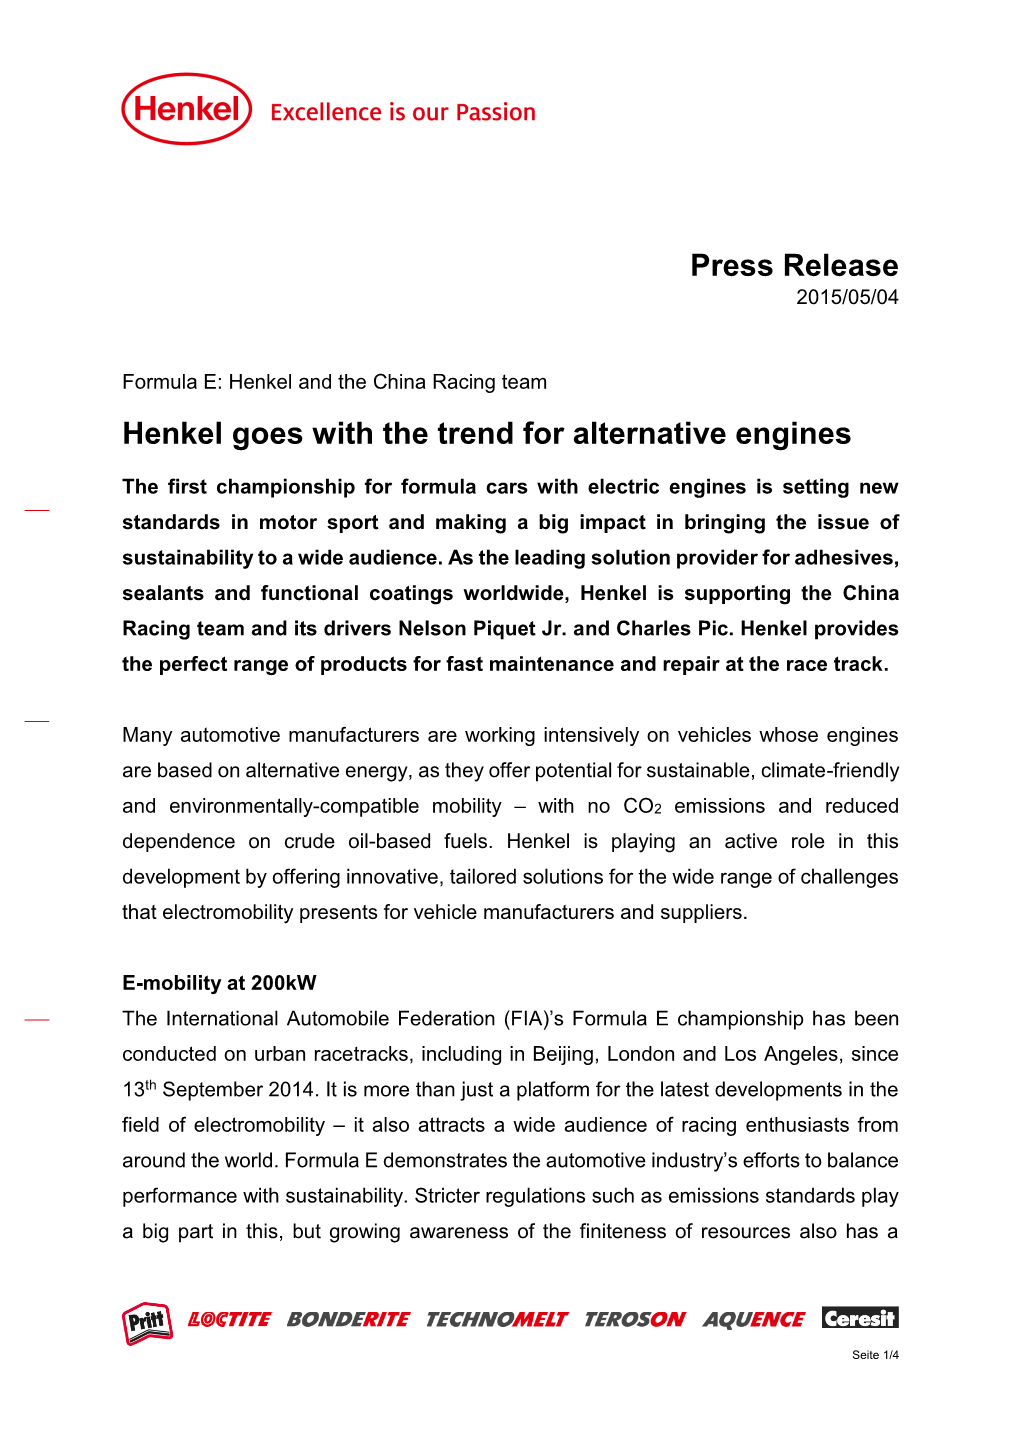 Press Release Henkel Goes with the Trend for Alternative Engines